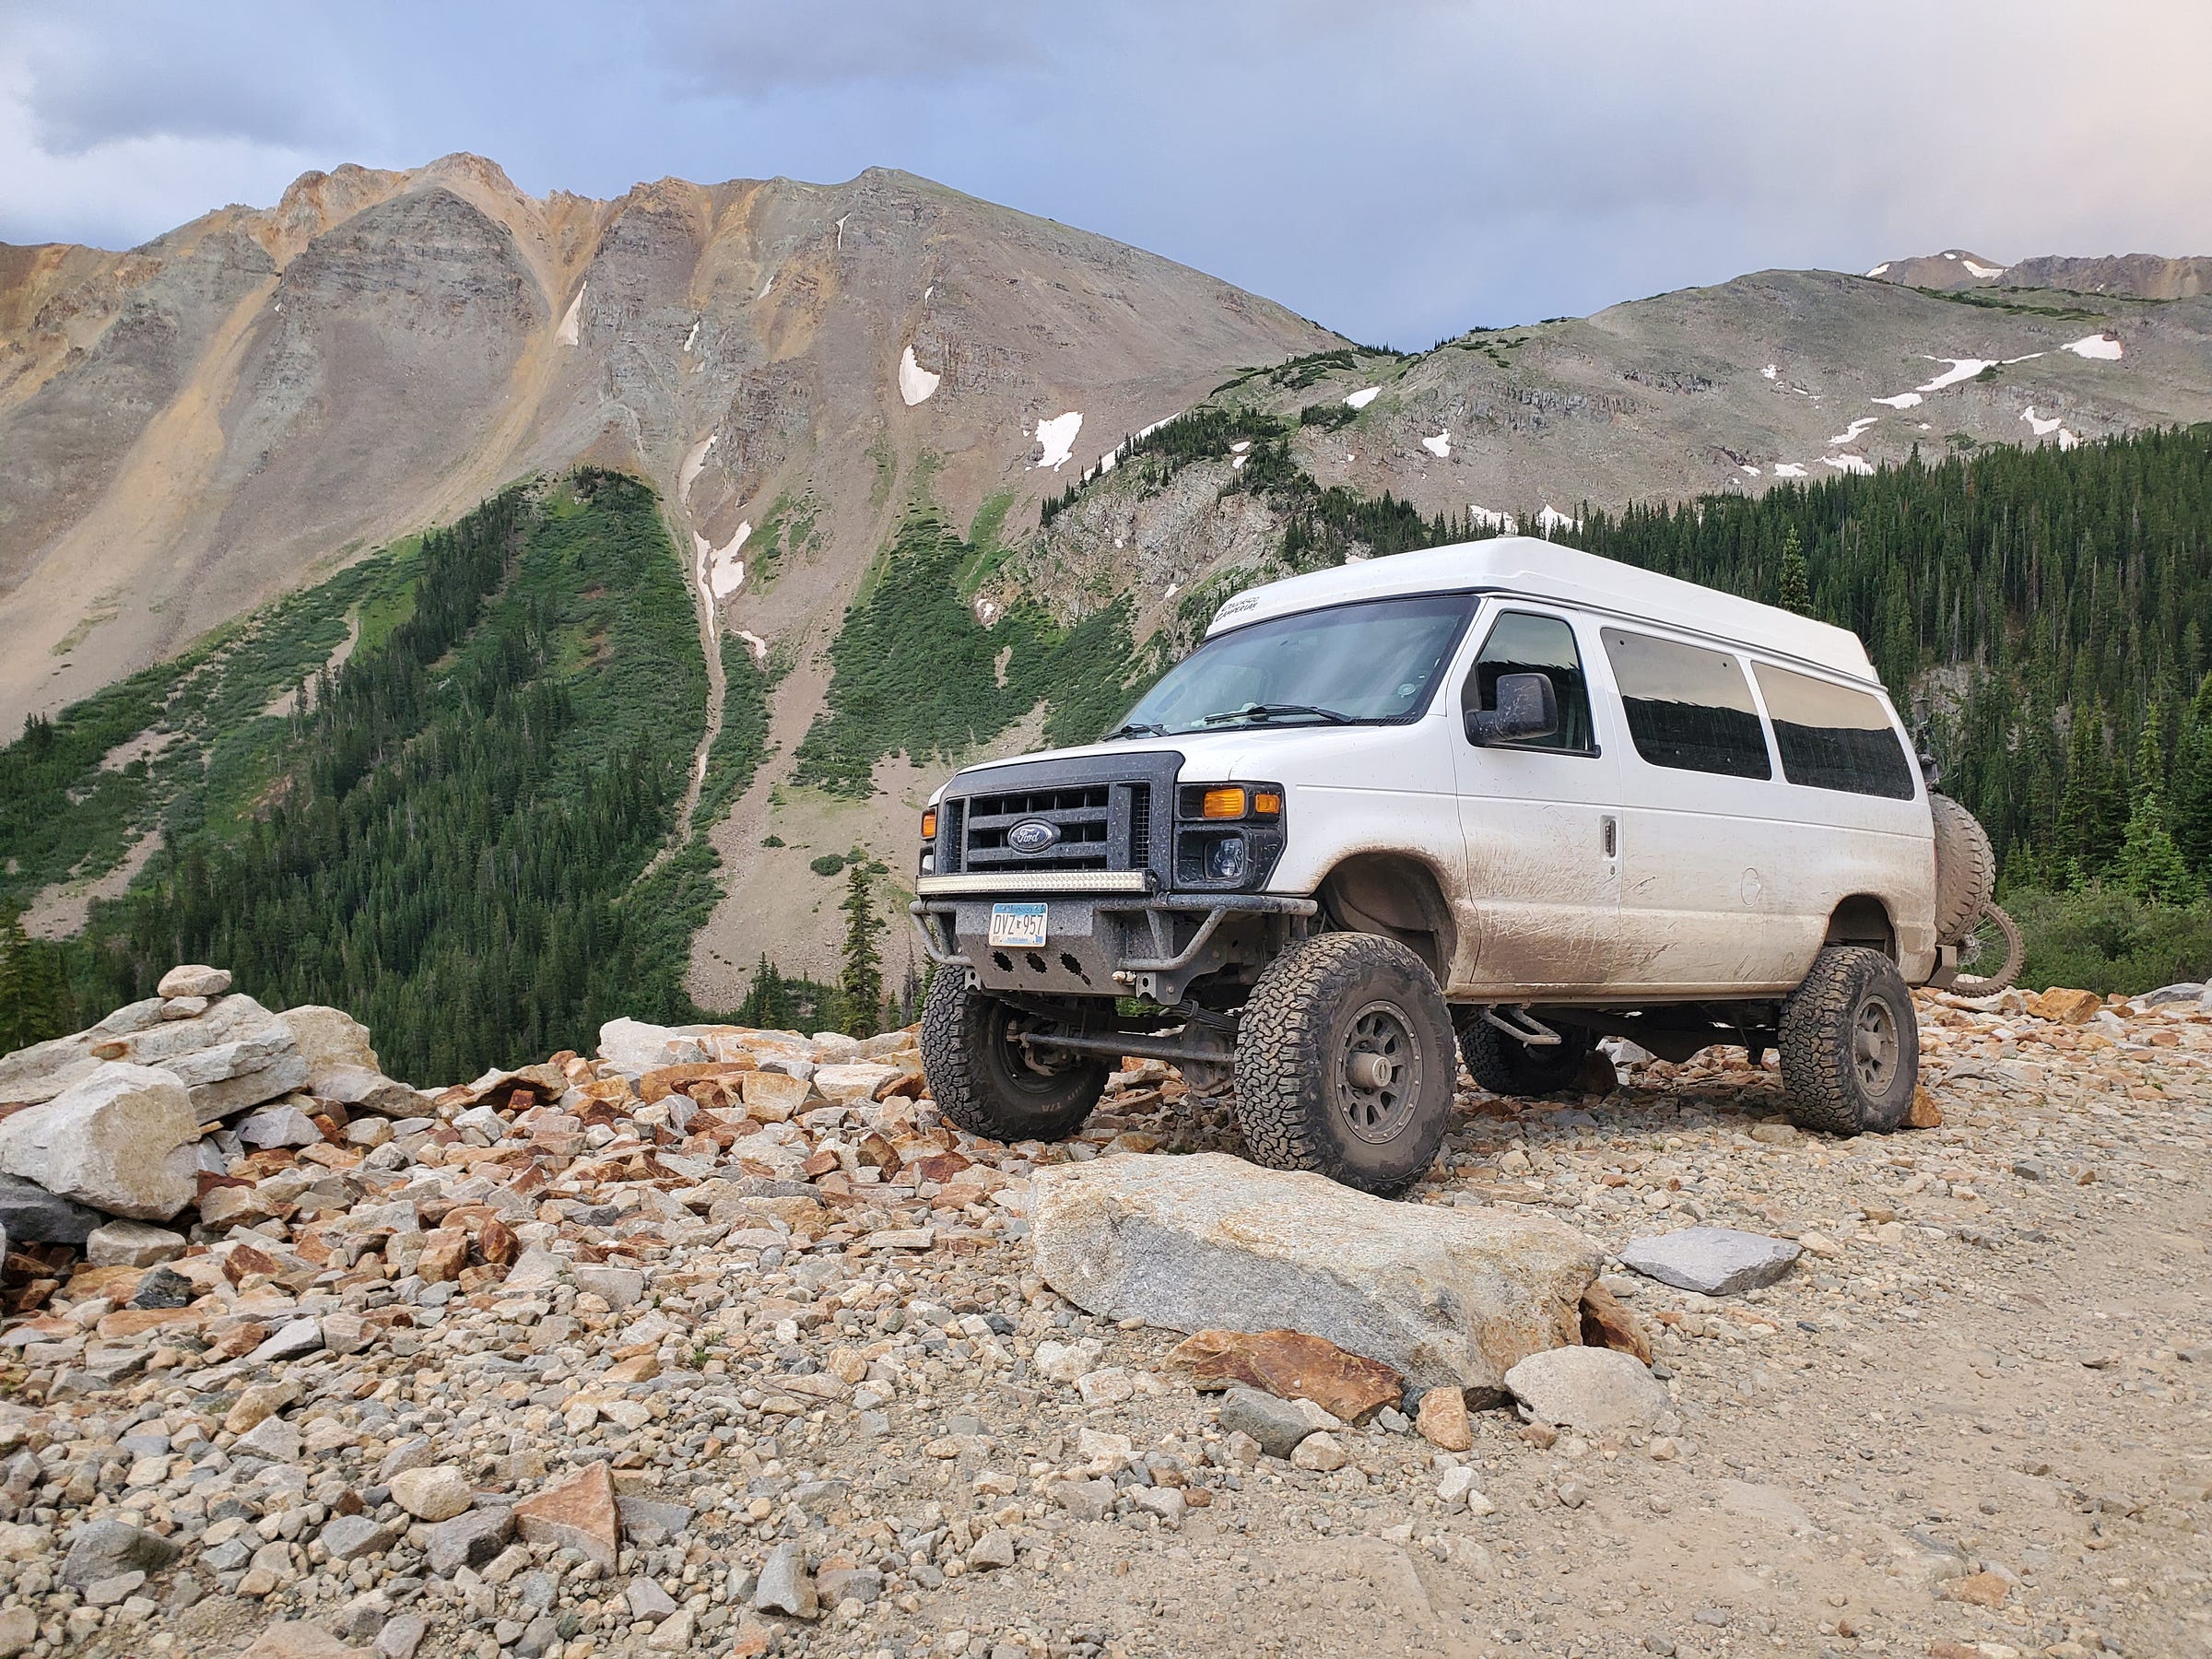 A heavily-modded van stands off-road with mountains in the background